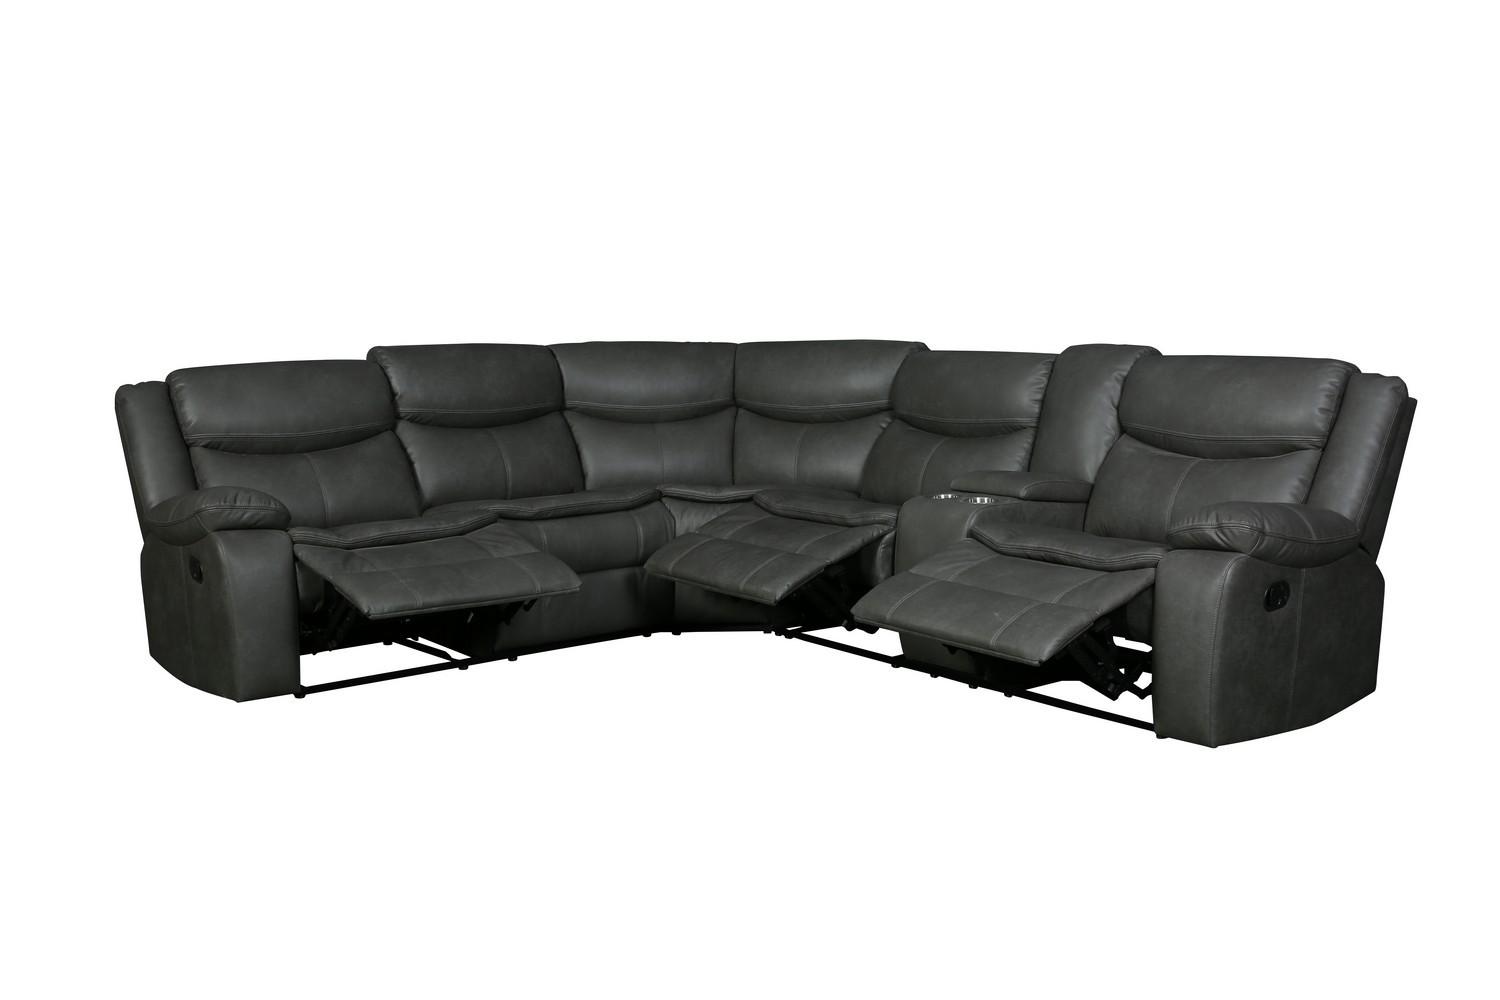 Contemporary Reclining Sectional 6967 6967-GRAY-SECT in Gray Leather Air Material